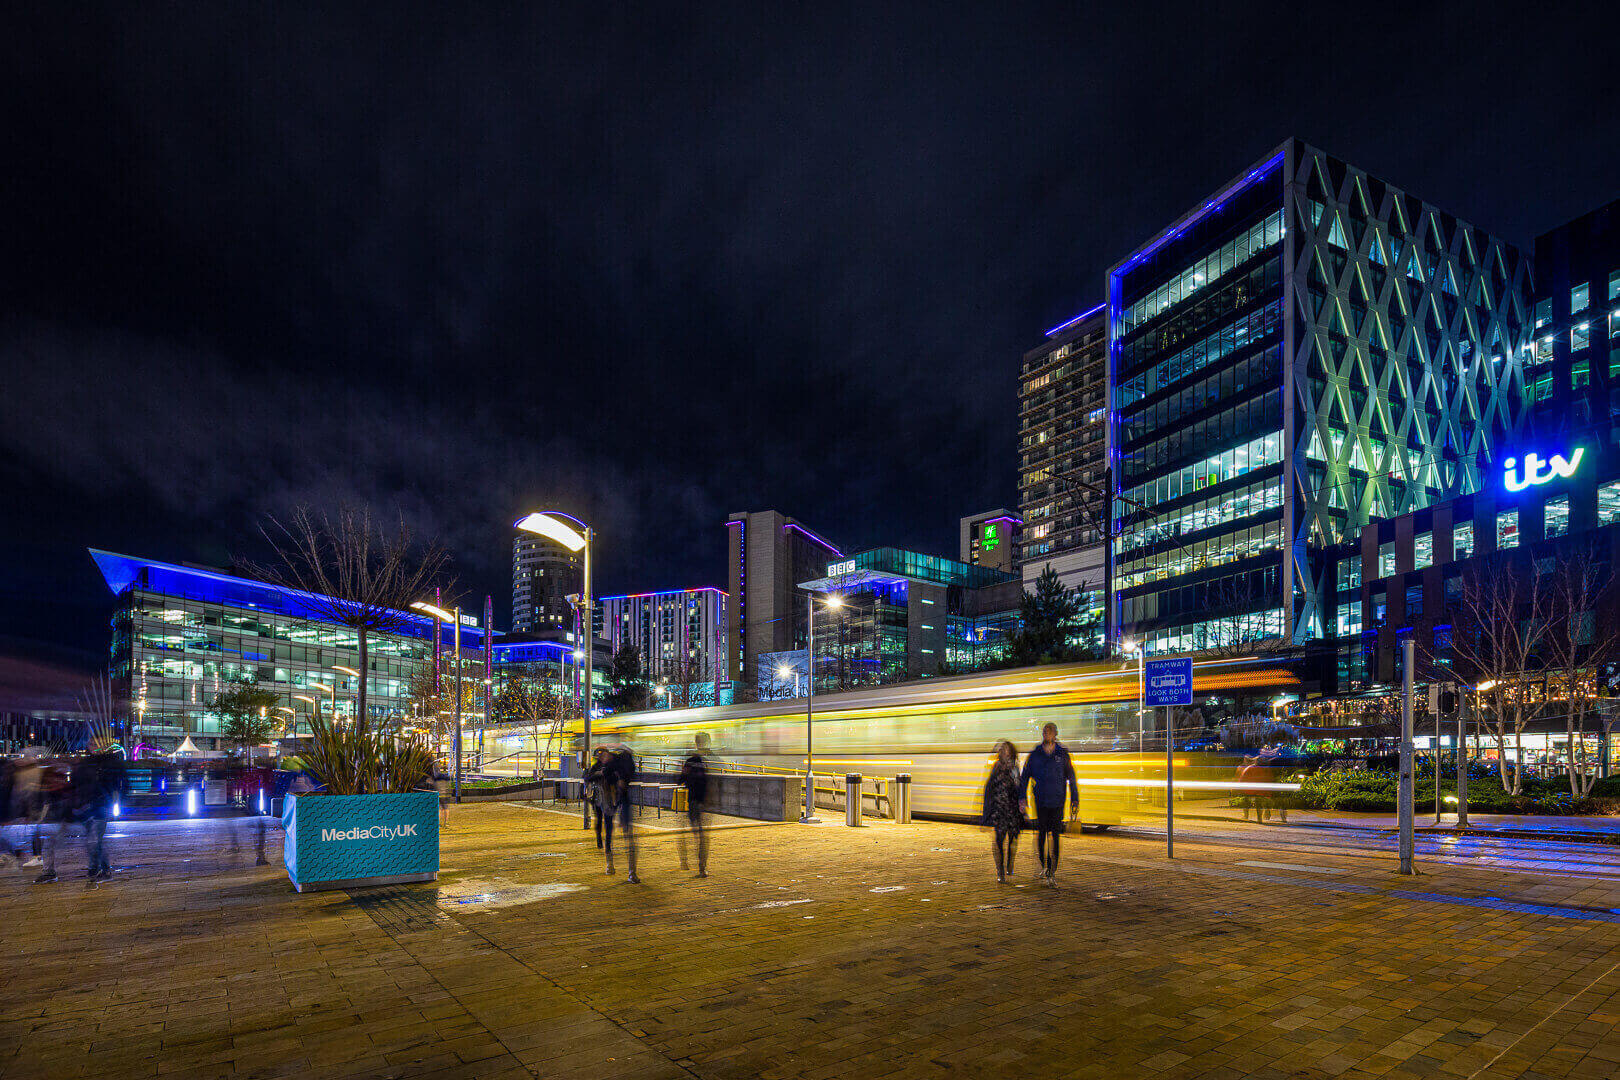 Commercial architecture and interior photography - MediaCityUK at night